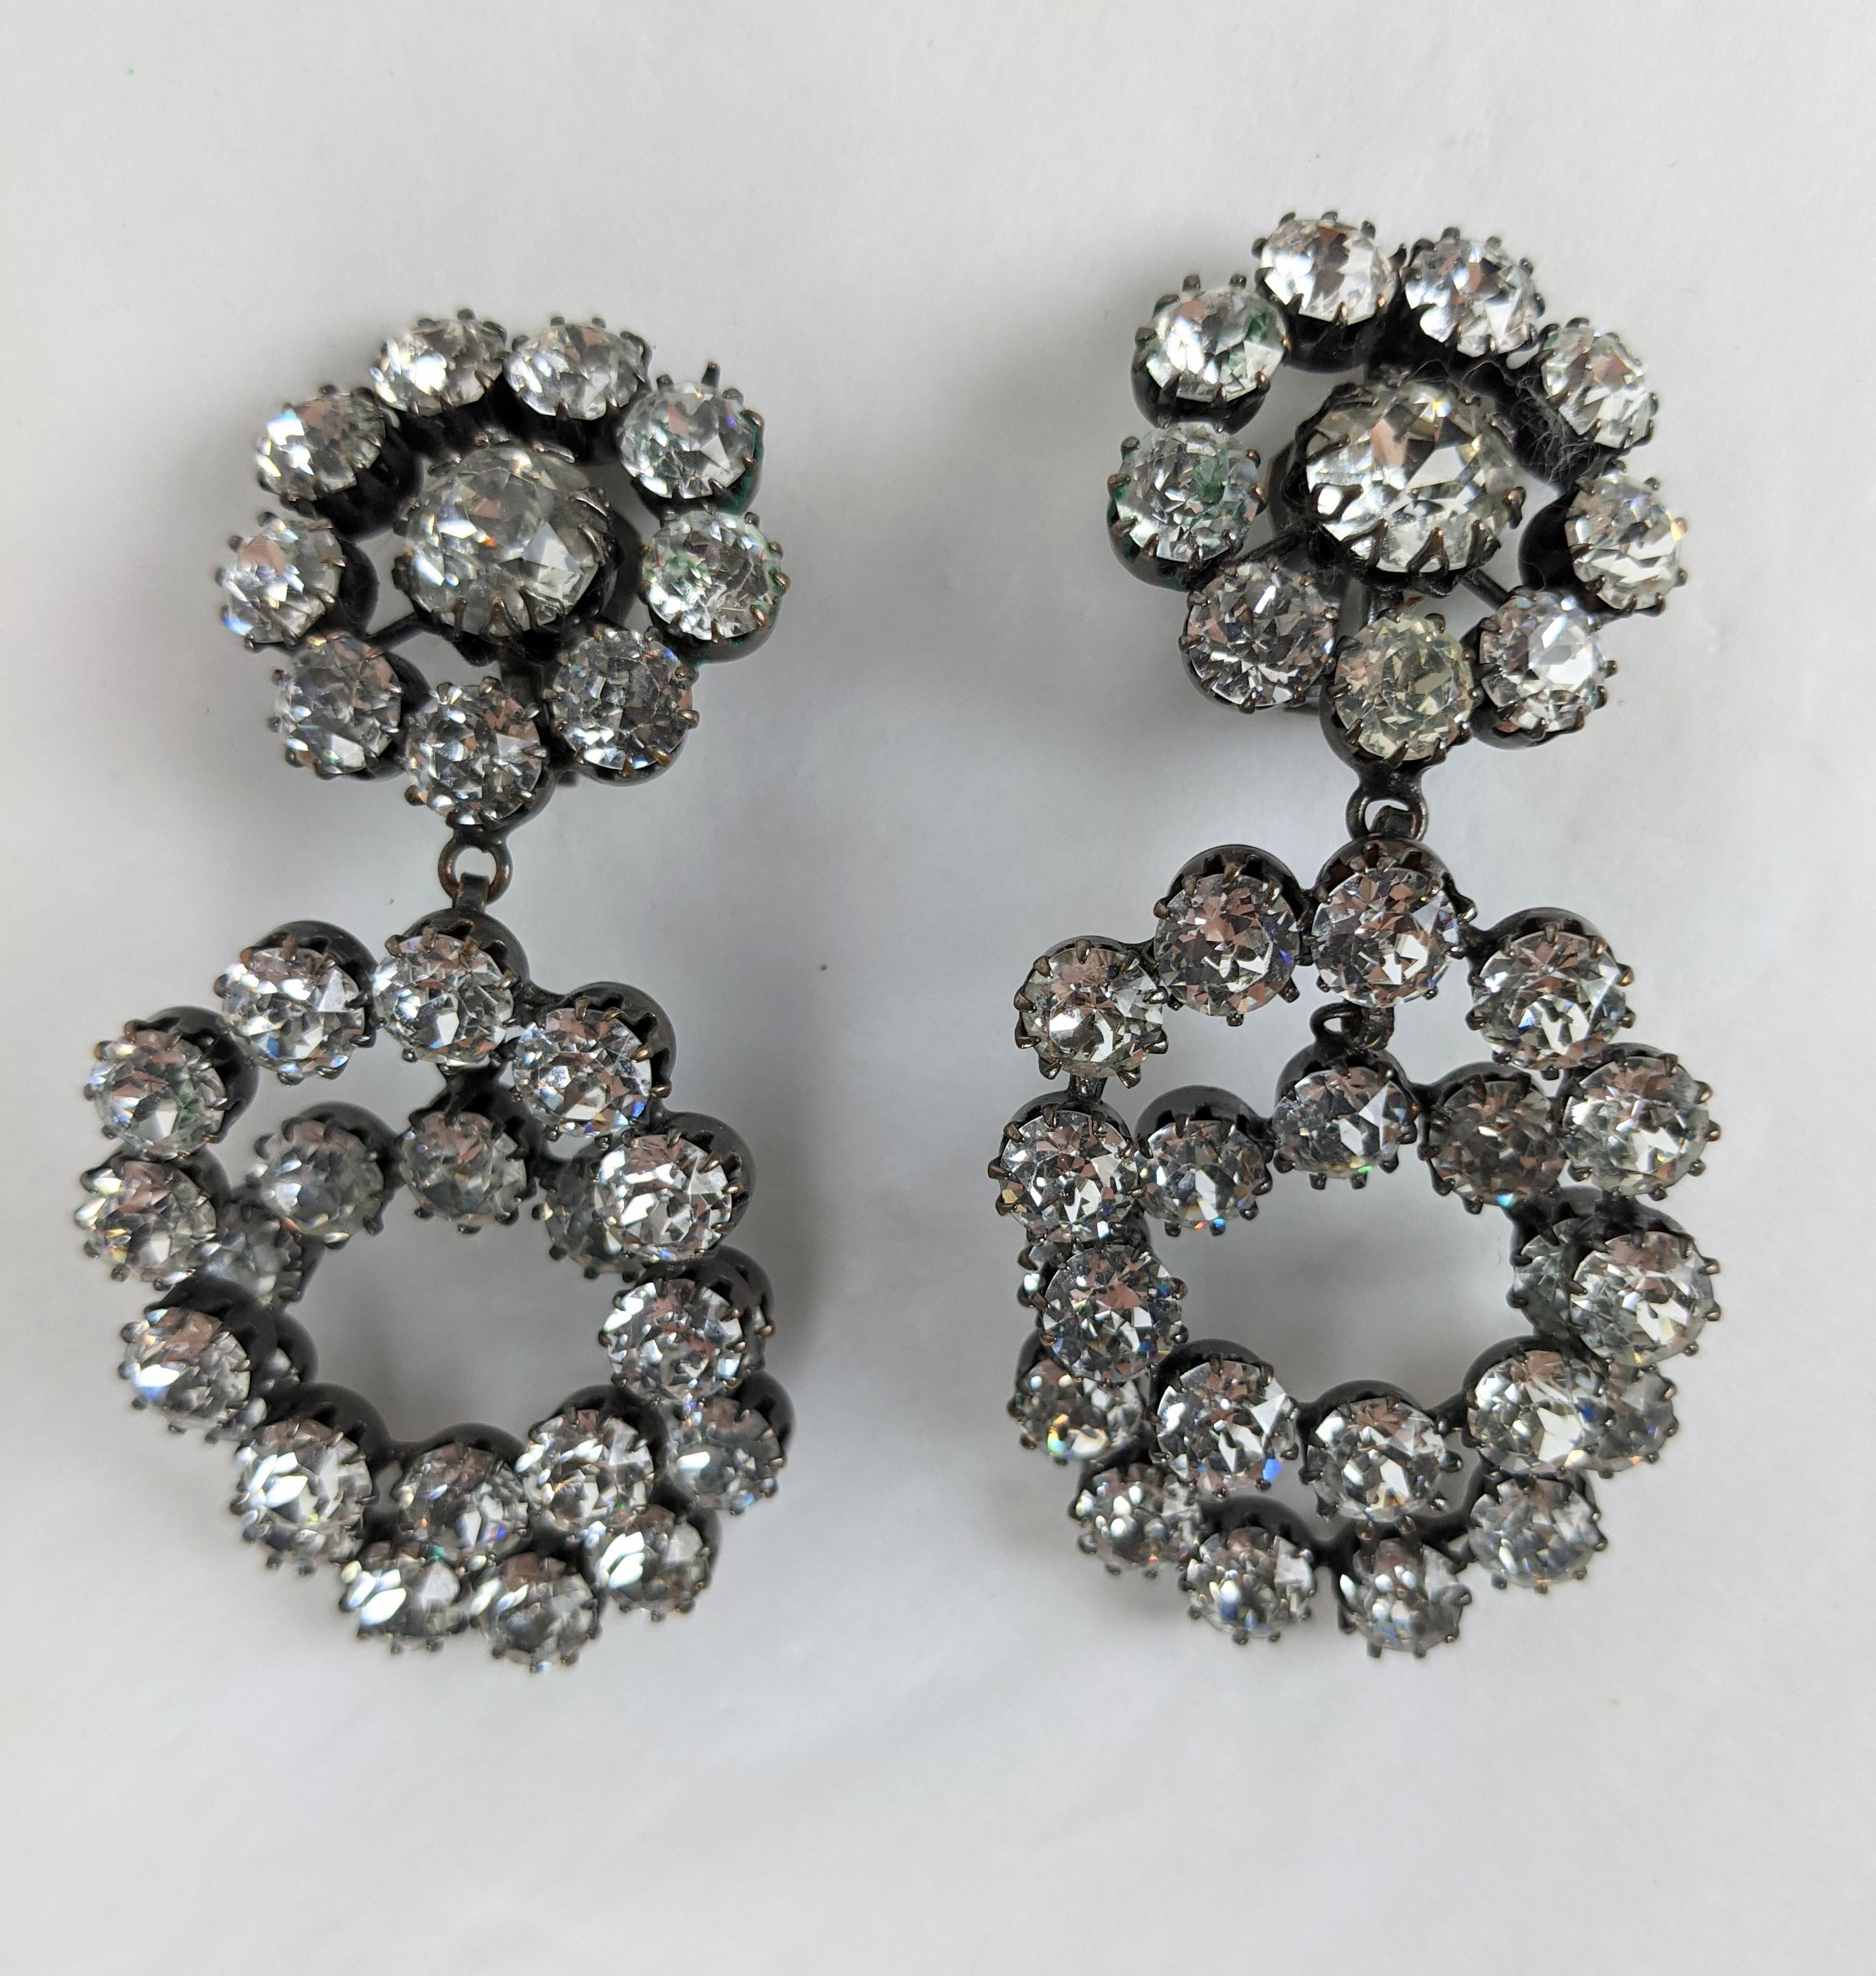 High quality unusual Austrian Crystal Hoop Earrings from the 1960's. 2 large crystal studded hoops fall independently from a crystal cluster with clip back fittings. Large and striking effect. 
3.5